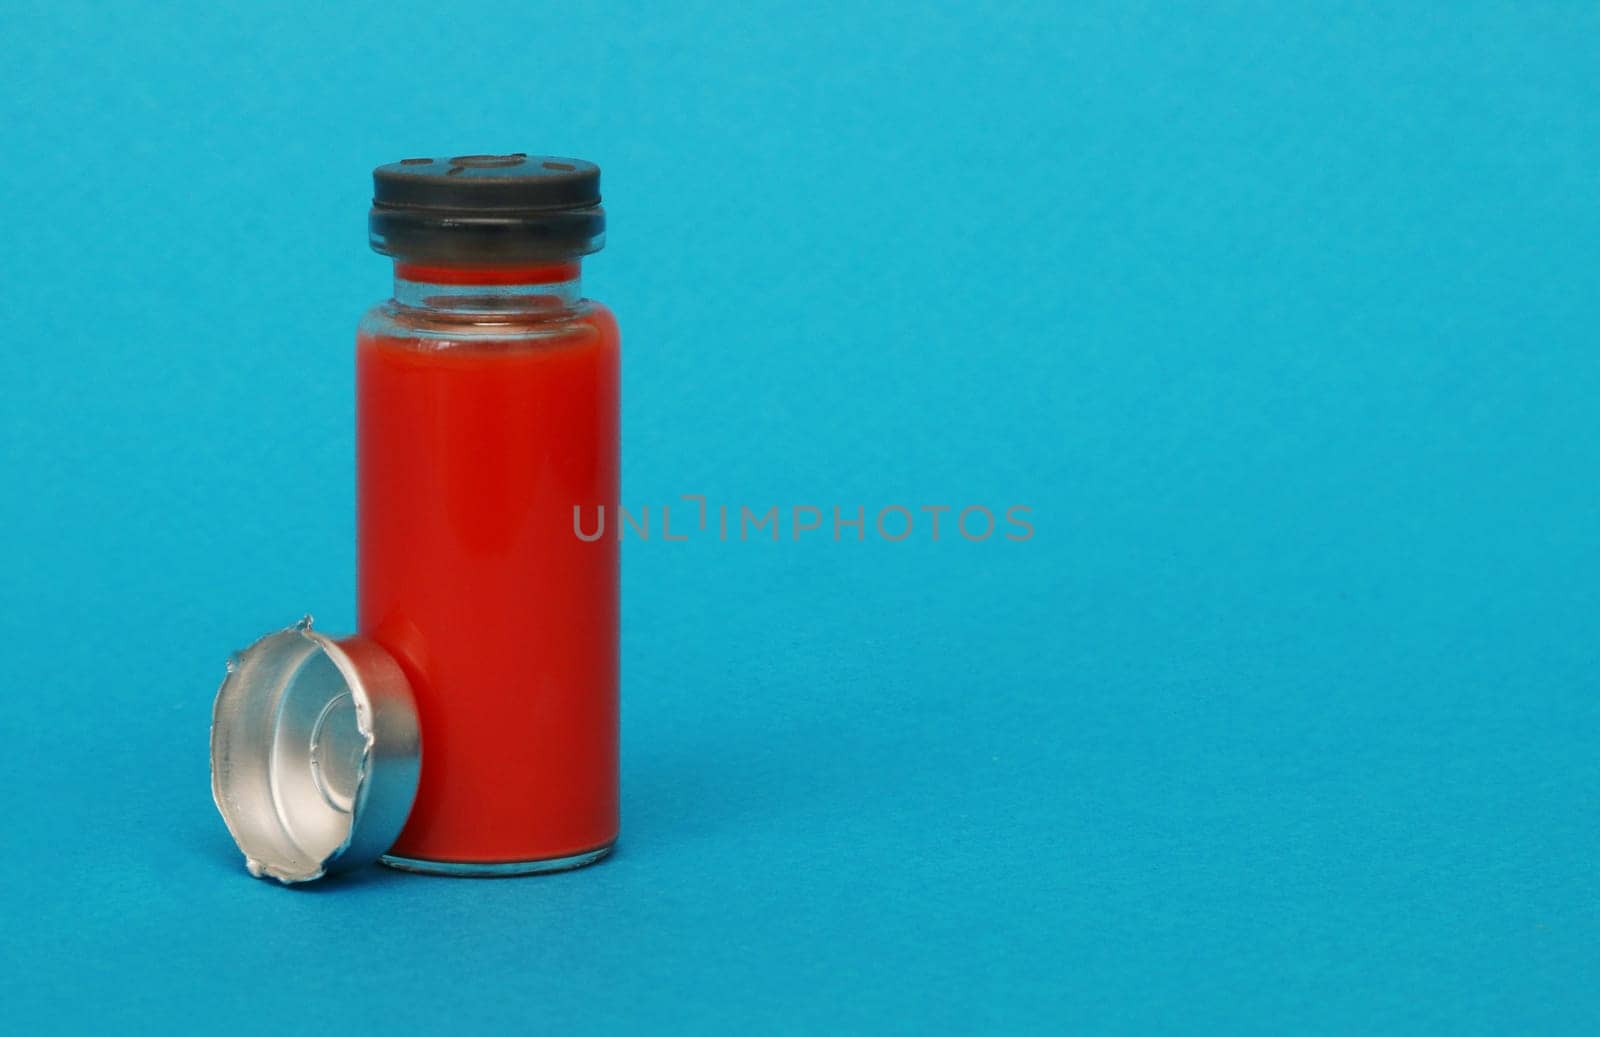 Glass medical bottle with a metal cap filled with blood. Bottle with red liquid on a blue paper background.